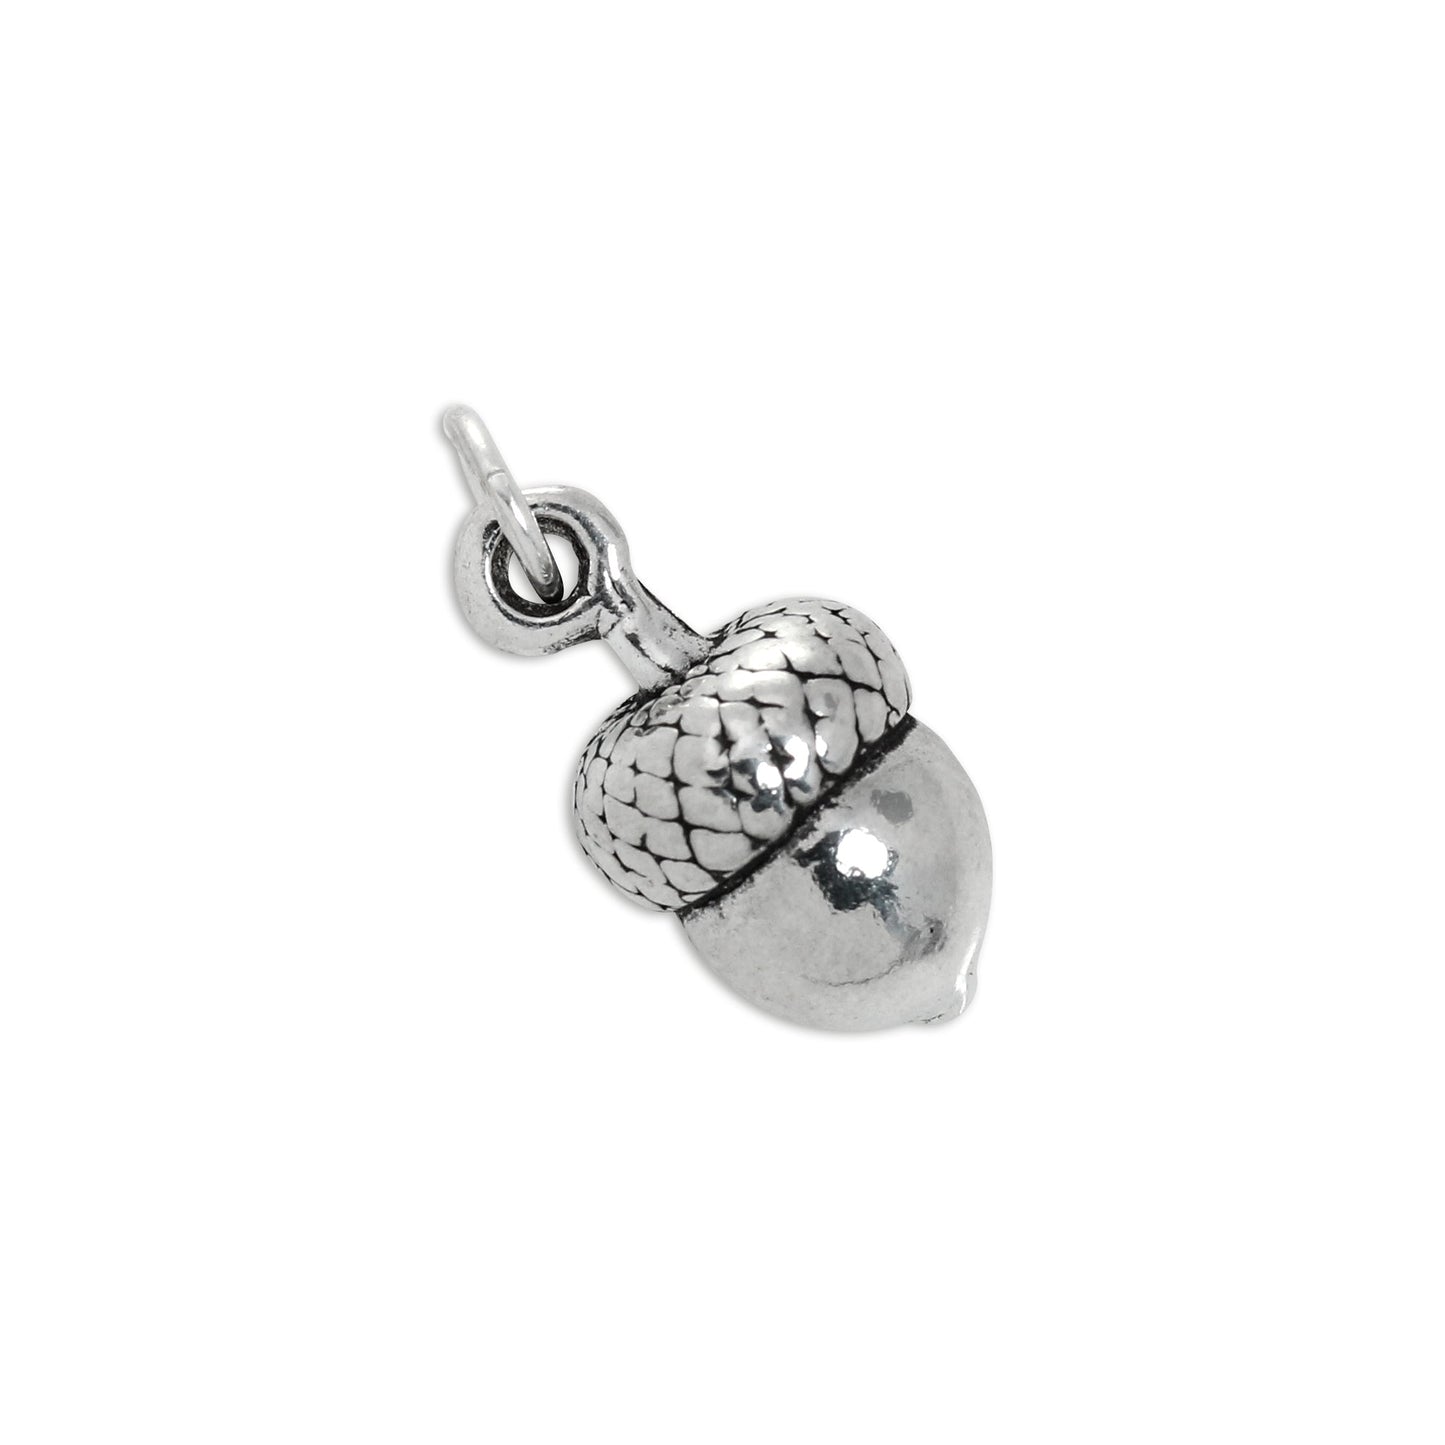 Sterling Silver Acorn Charm